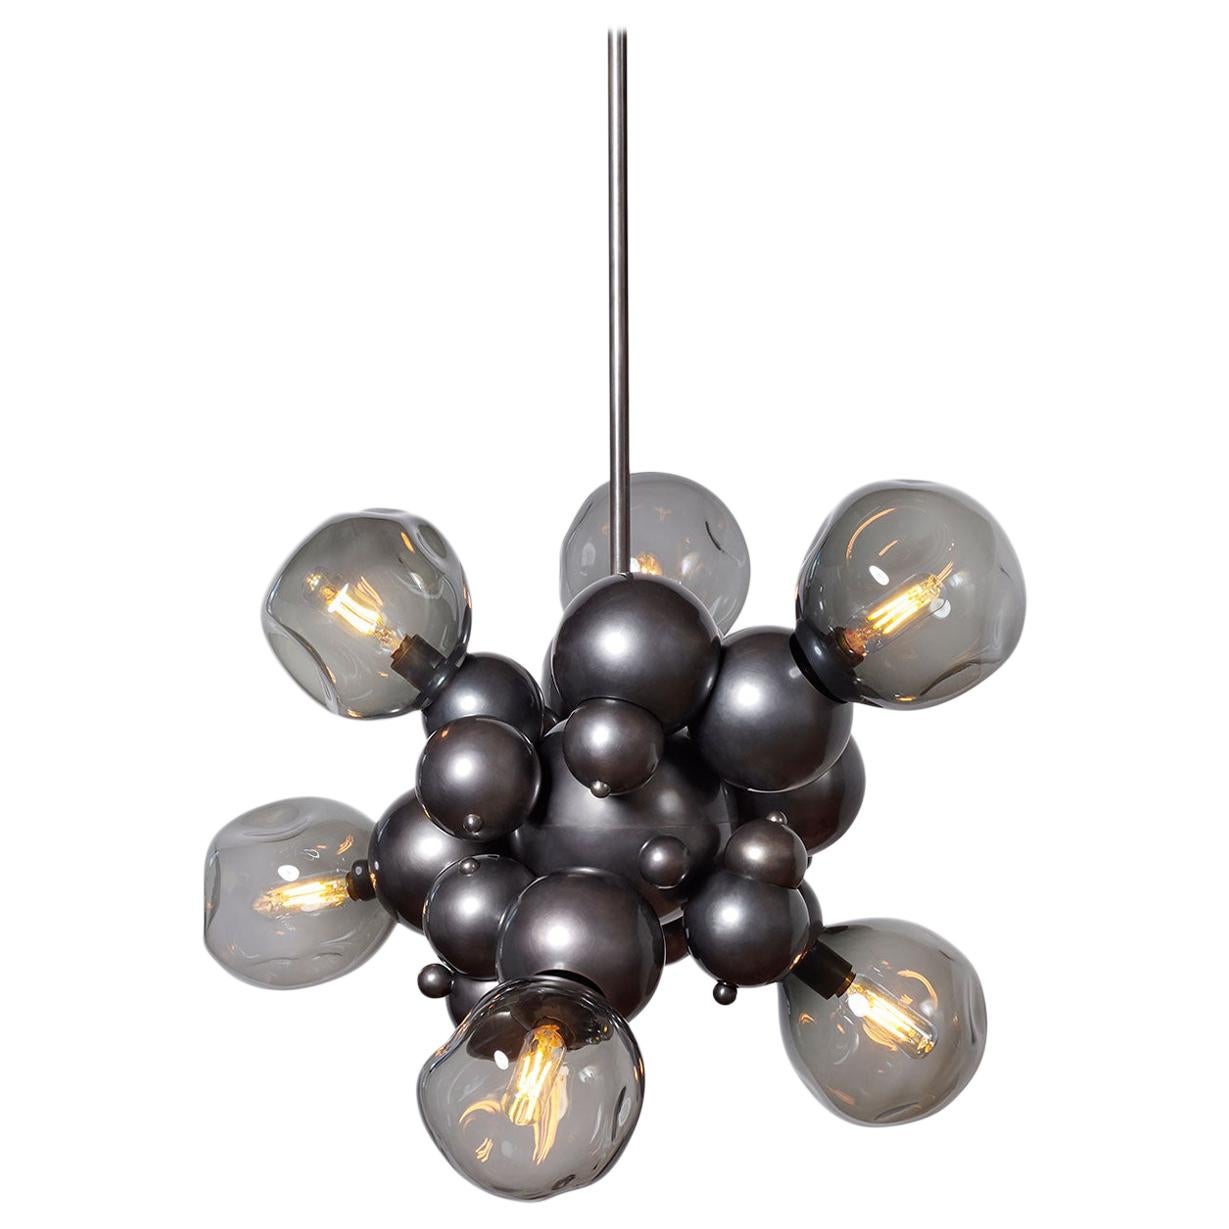 Organic "Bubbly" Cluster Chandelier in Oil-Rubbed Bronze